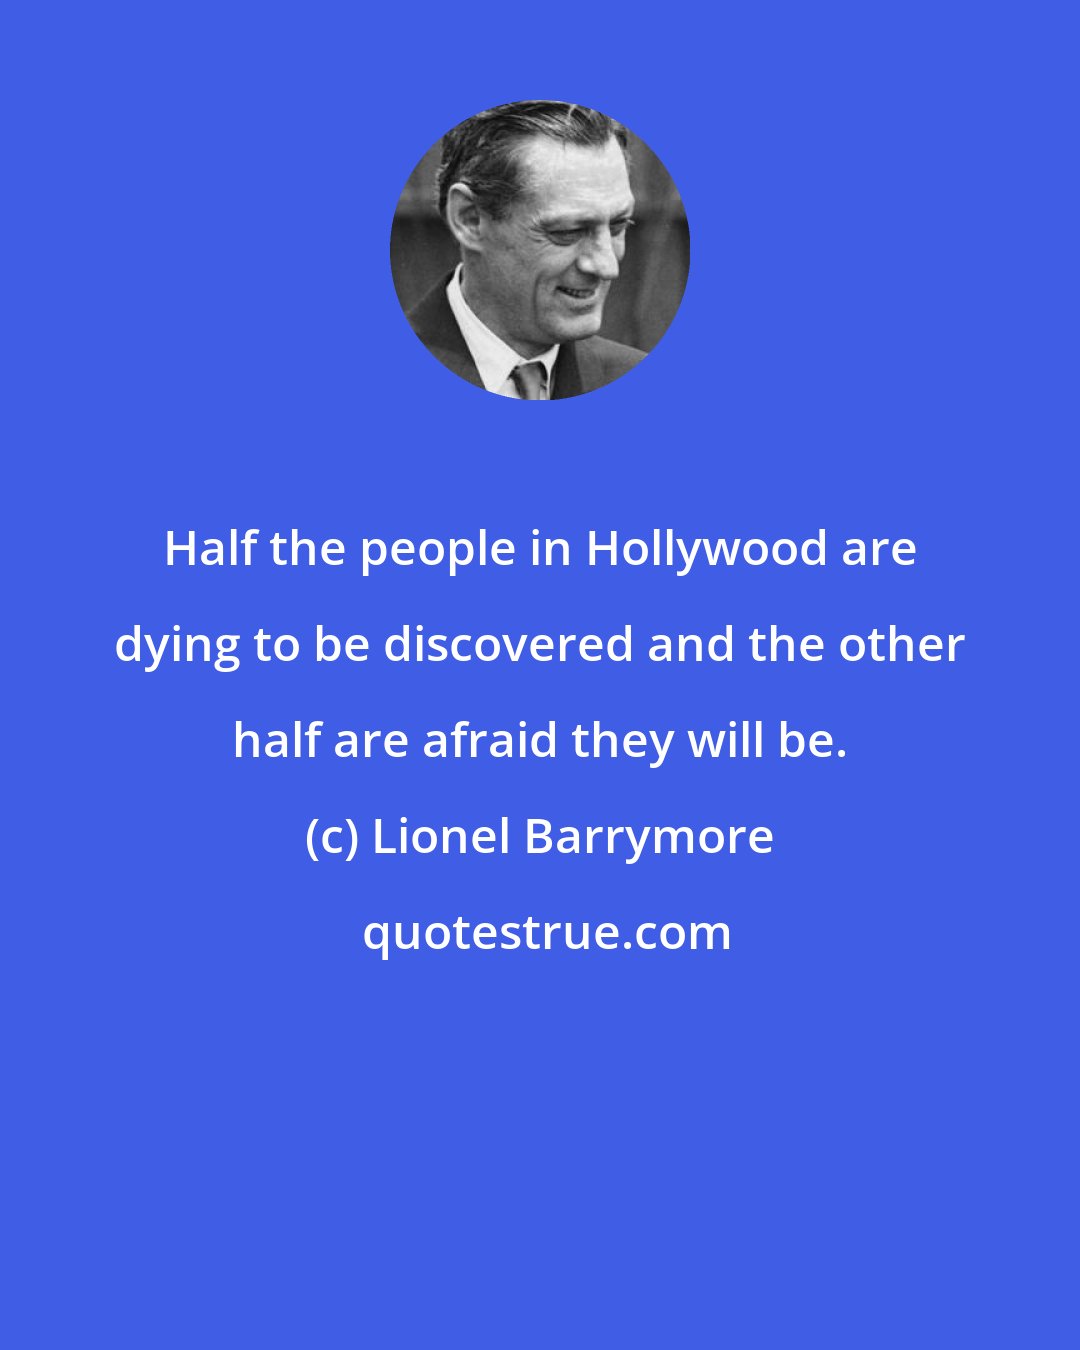 Lionel Barrymore: Half the people in Hollywood are dying to be discovered and the other half are afraid they will be.